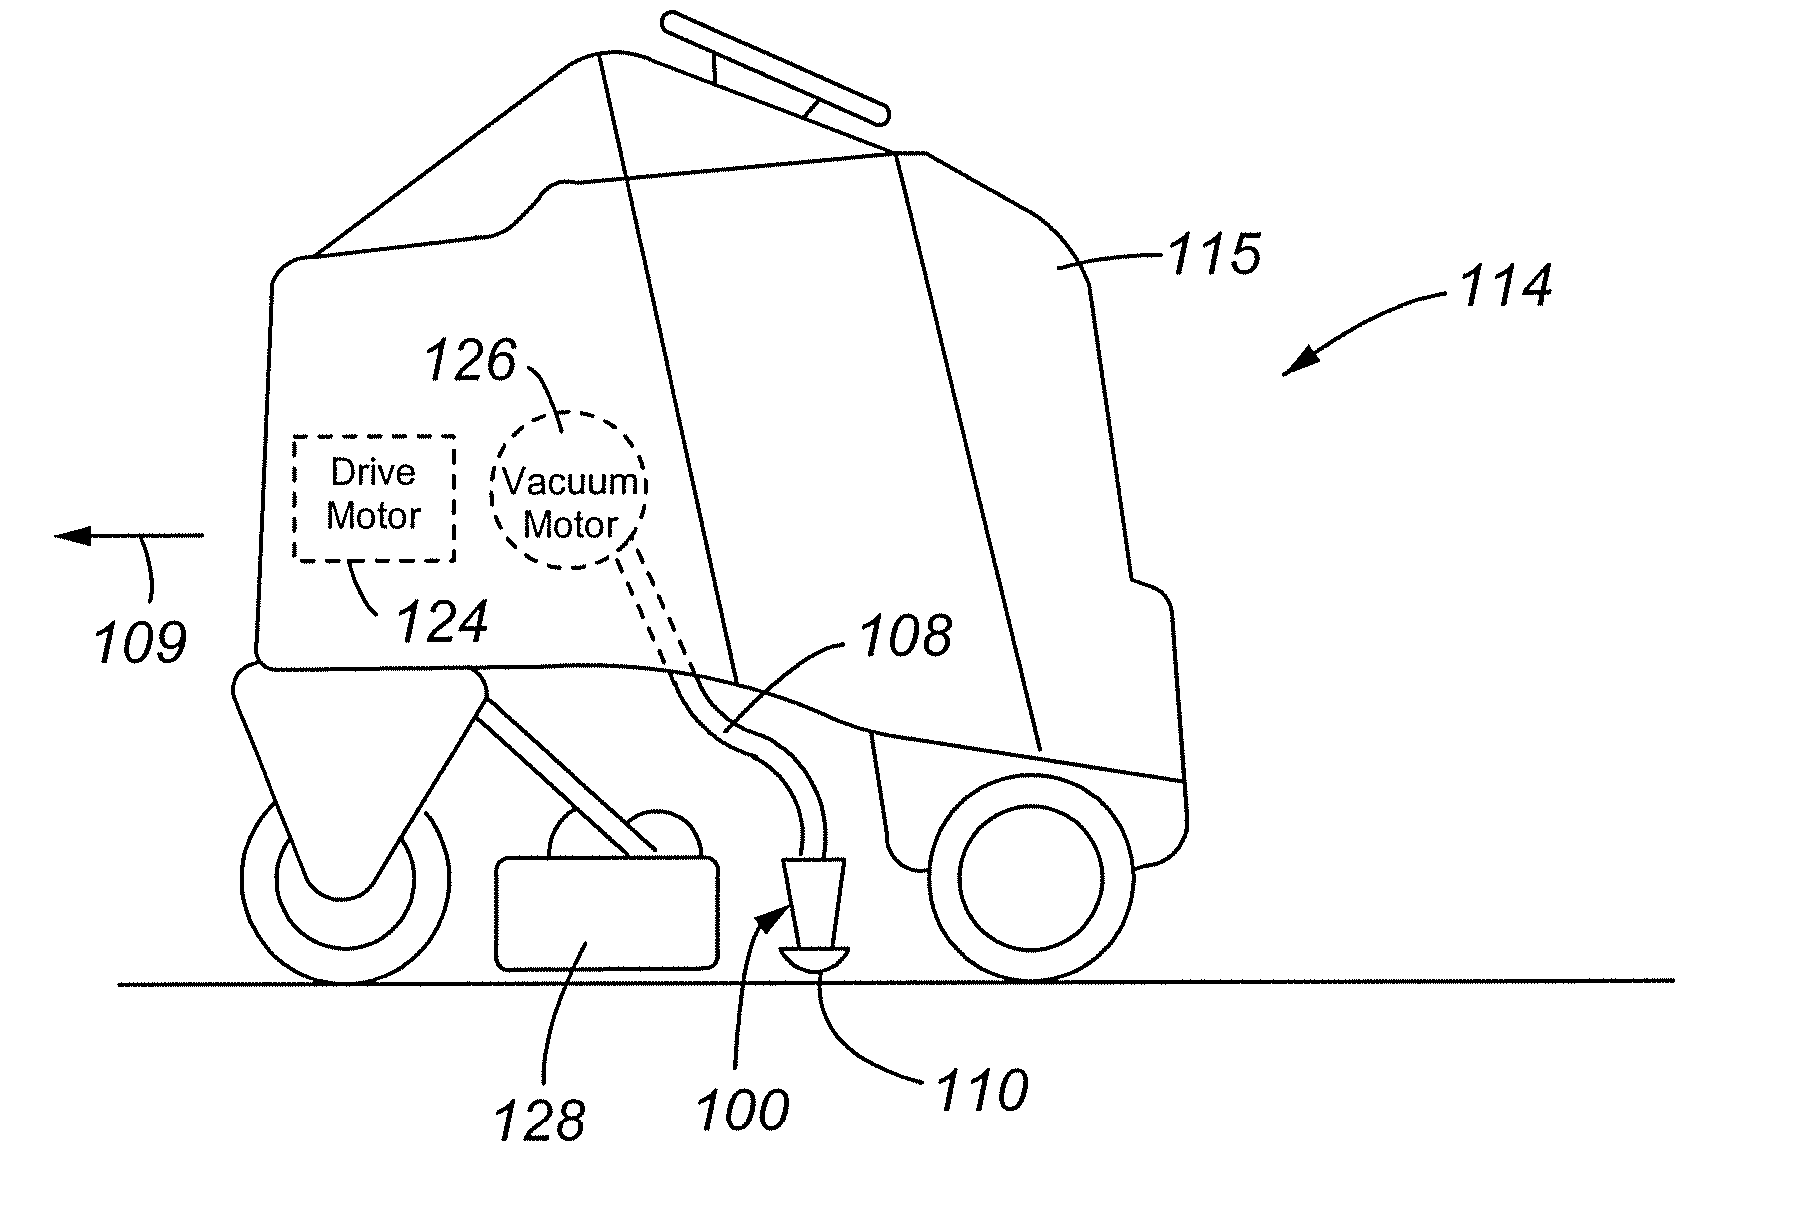 Flexible pickup lips for use with fixed vacuum shoes on self-contained and propelled carpet cleaning equipment